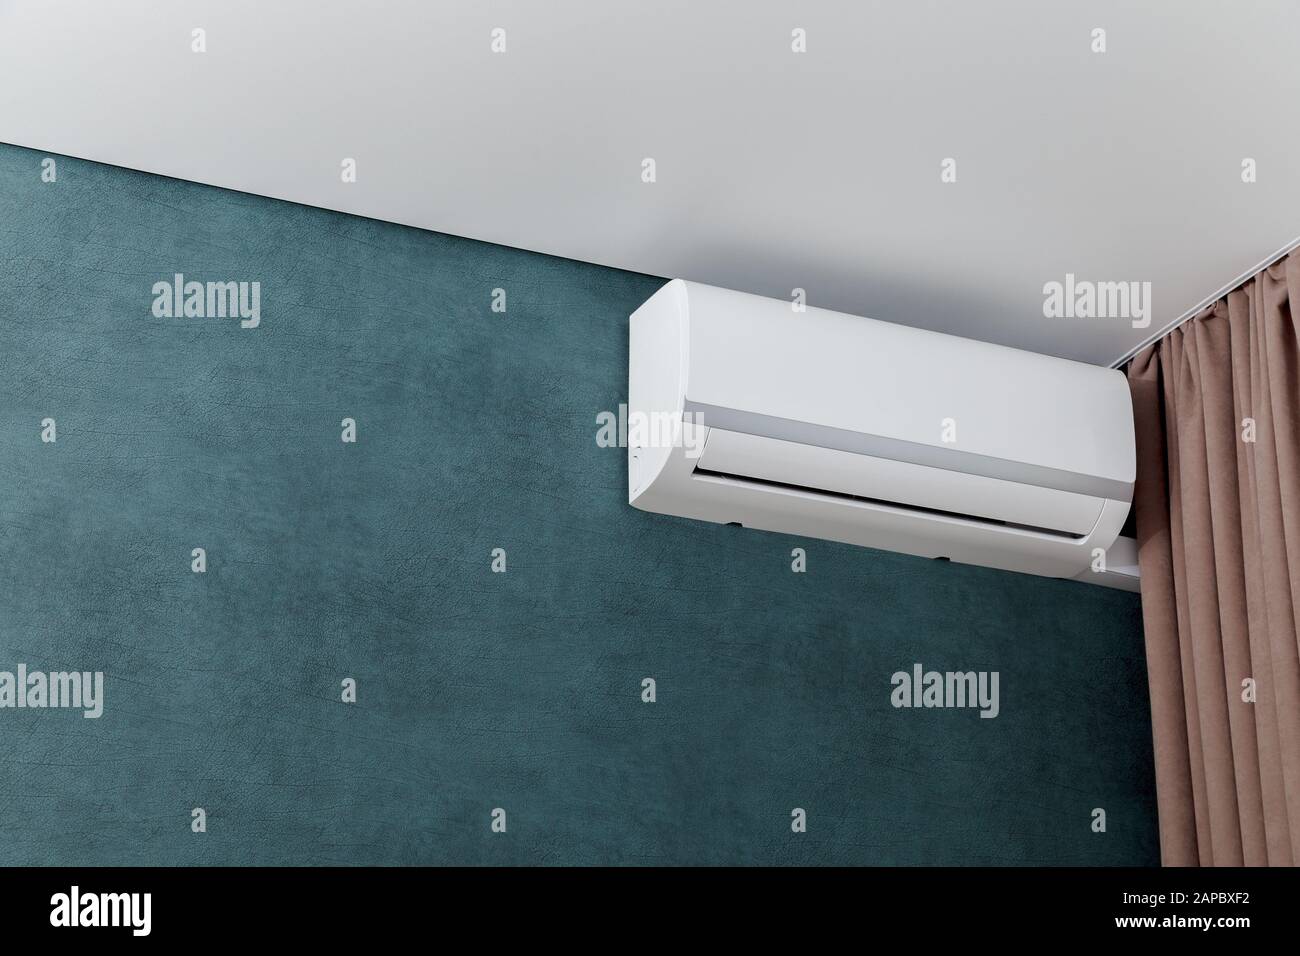 Air conditioner on wall, shallow dept of field Stock Photo